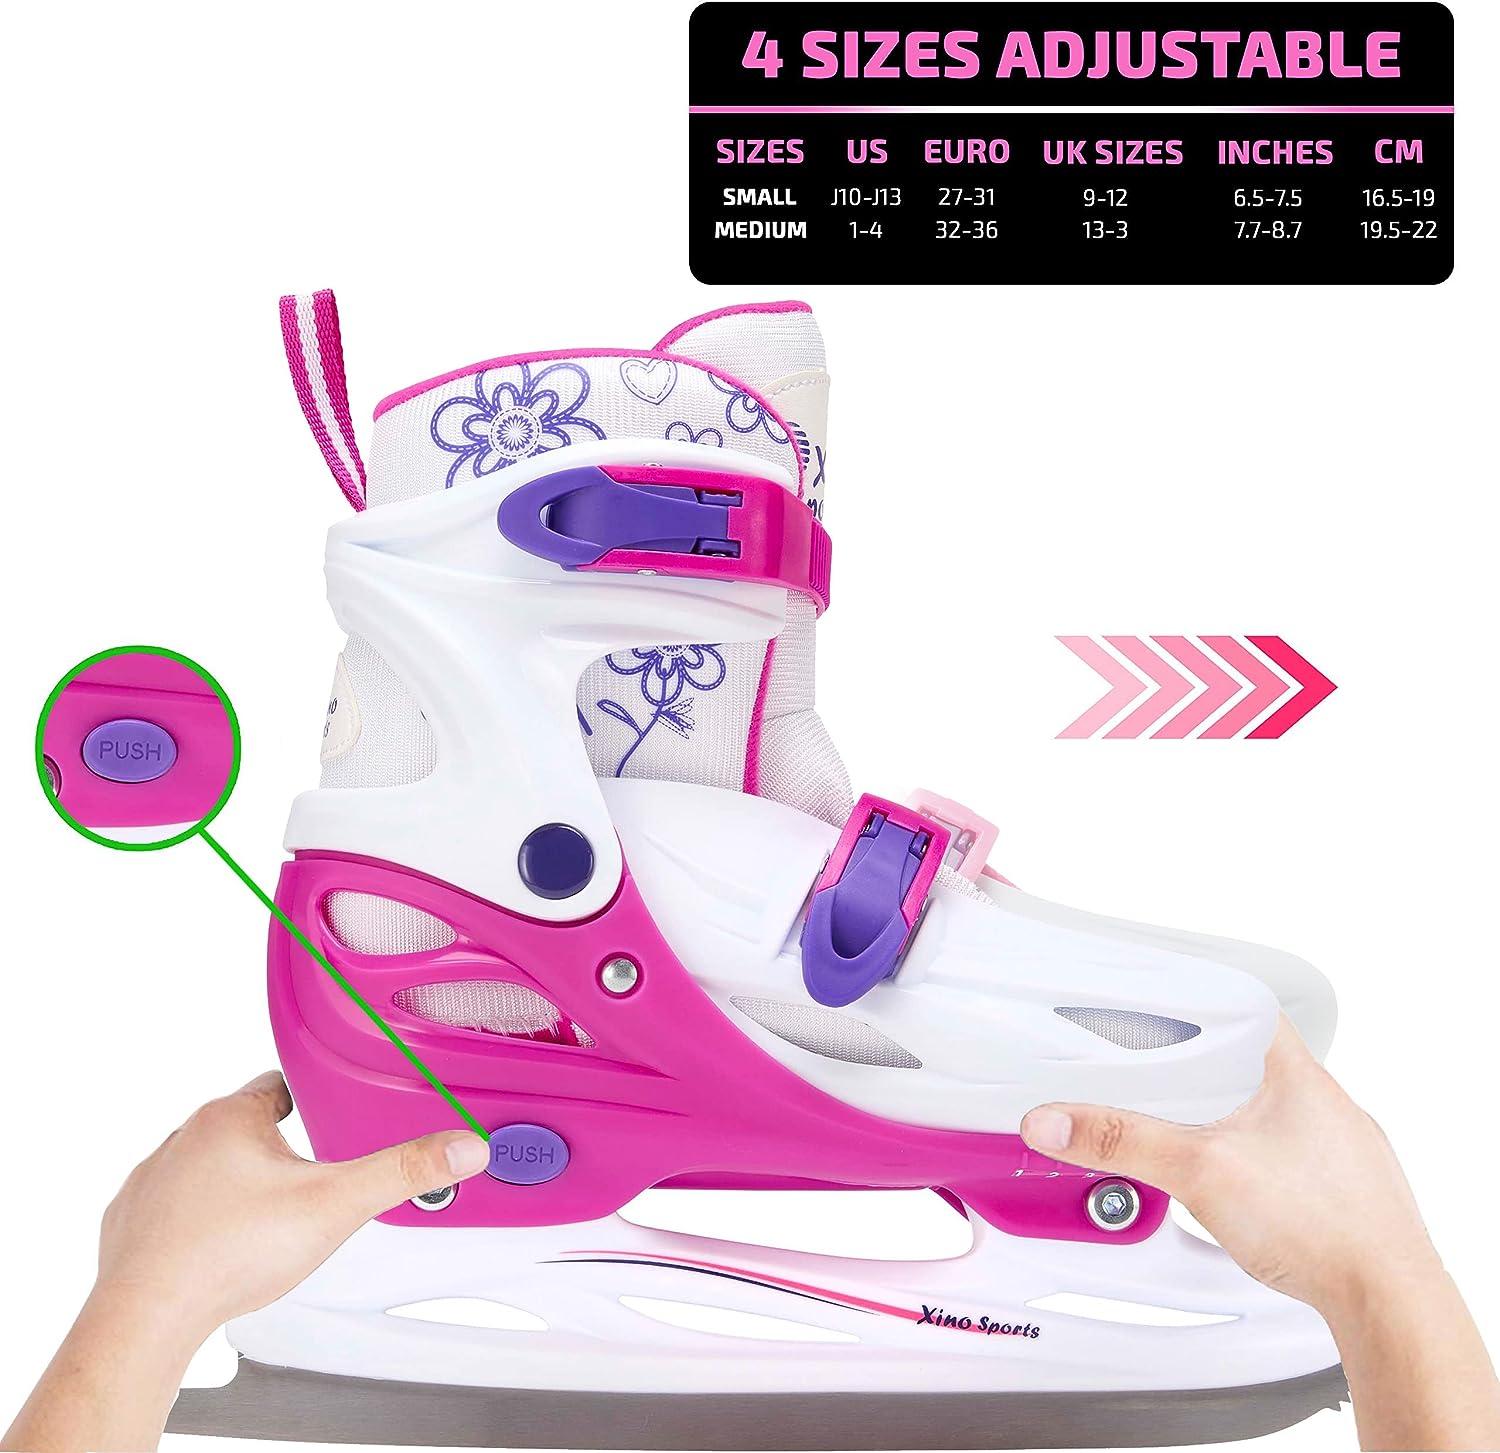 Xino Sports Adjustable Ice Skates - for Girls and Boys, Two Awesome Colors  - Blue and Pink, Soft Padding and Reinforced Ankle Support, Fun to Skate!  Pink Medium Big Kid (1-4)